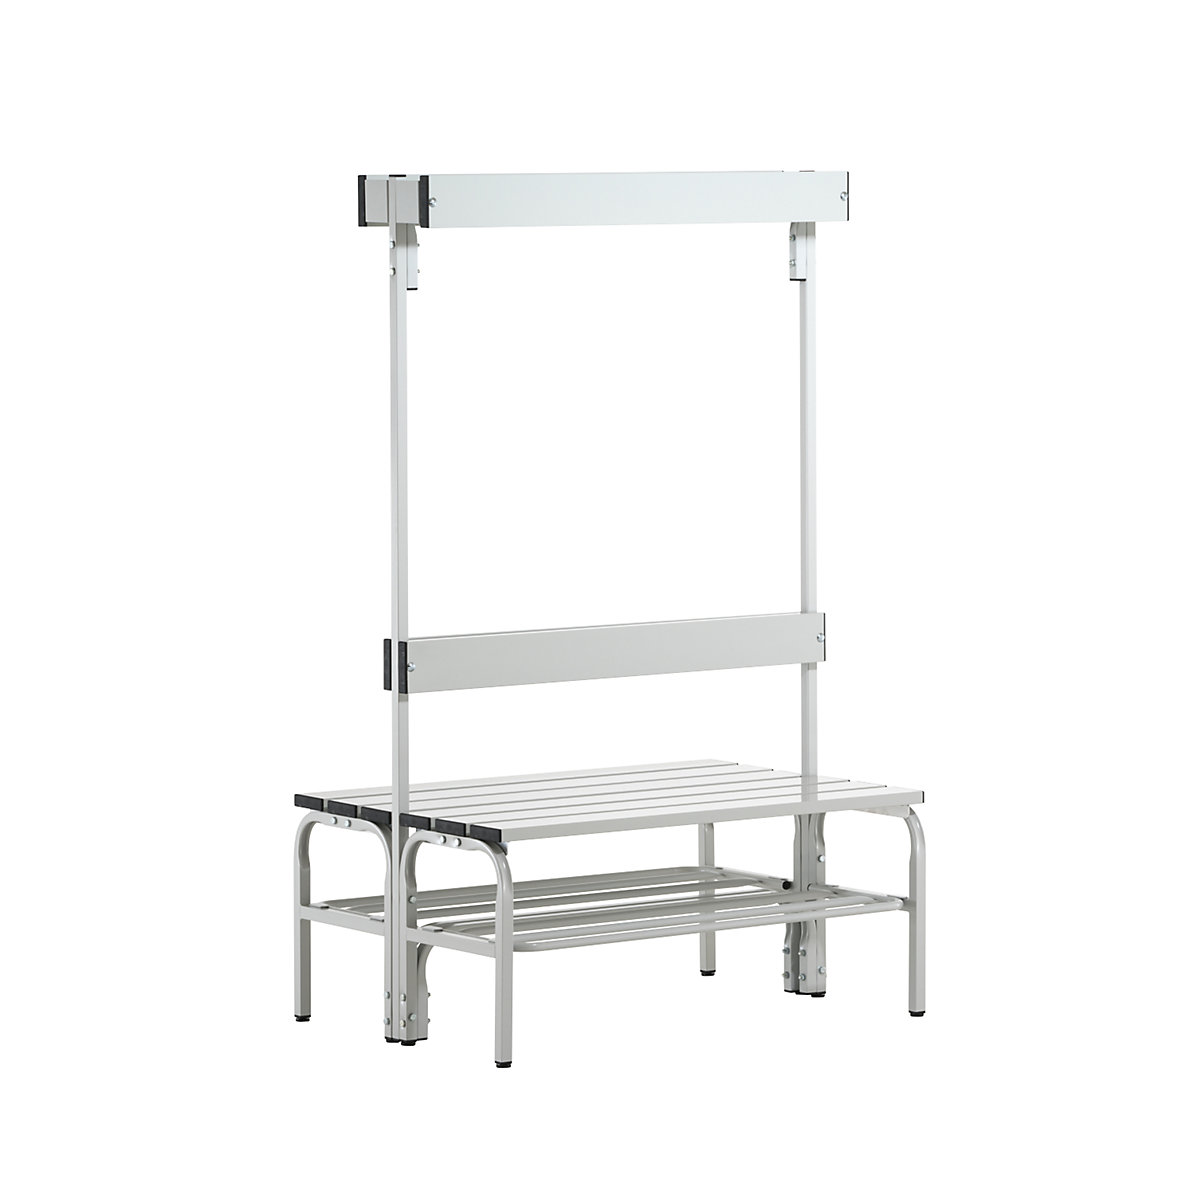 Sypro – Changing room bench with aluminium slats, HxD 1650 x 725 mm, double sided, length 1015 mm, 6 hooks, light grey, shoe rack